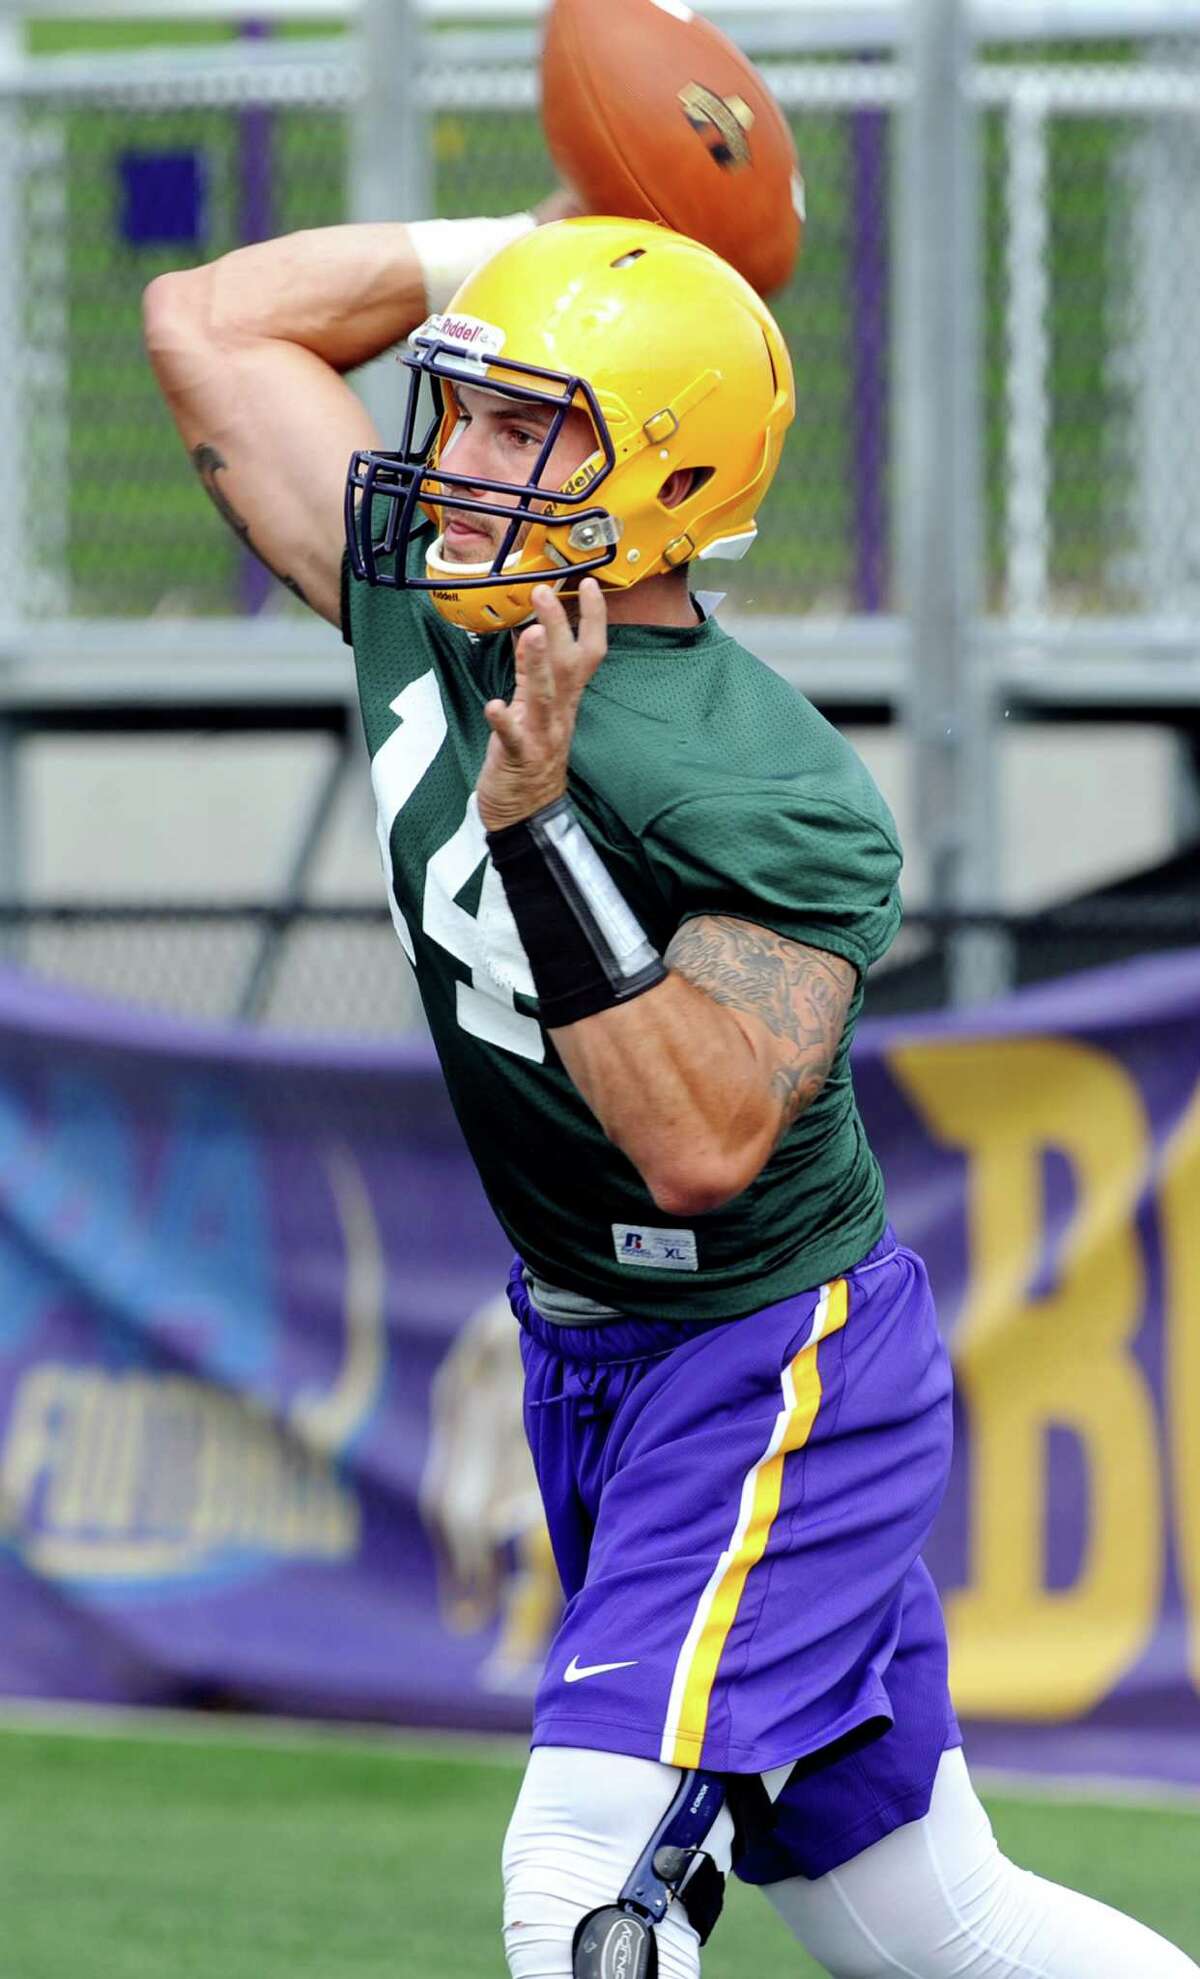 UAlbany quarterback DJ Crook throws the ball during the first football practice of the season on Friday, Aug. 7, 2015, at UAlbany in Albany, N.Y. (Cindy Schultz / Times Union)